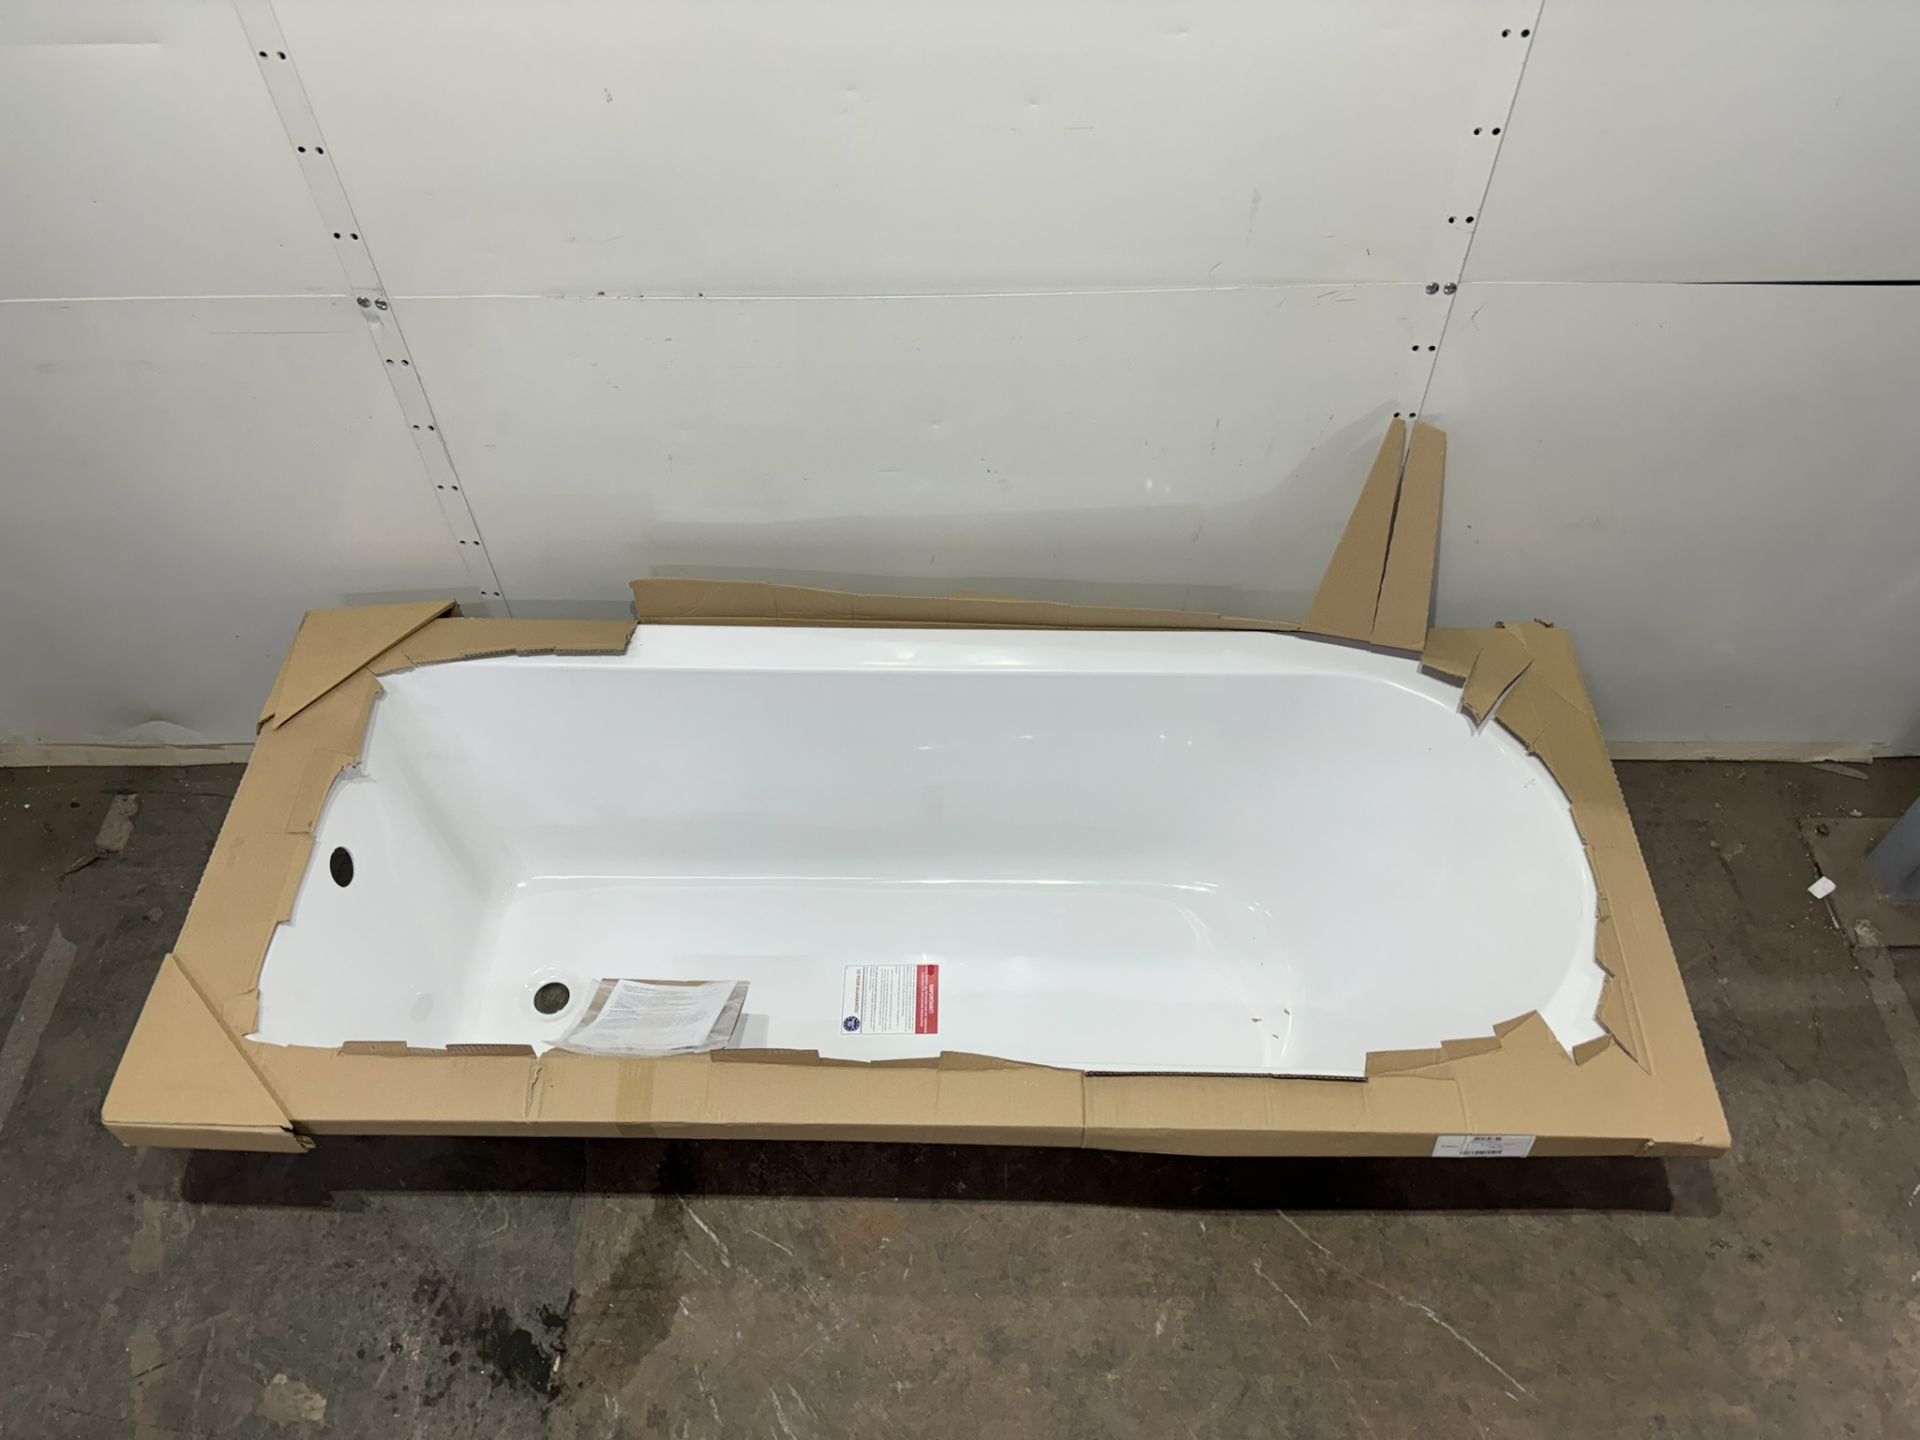 Essentials Round Single Ended 1700mm x 70mm Rectangular Bath - Image 2 of 5